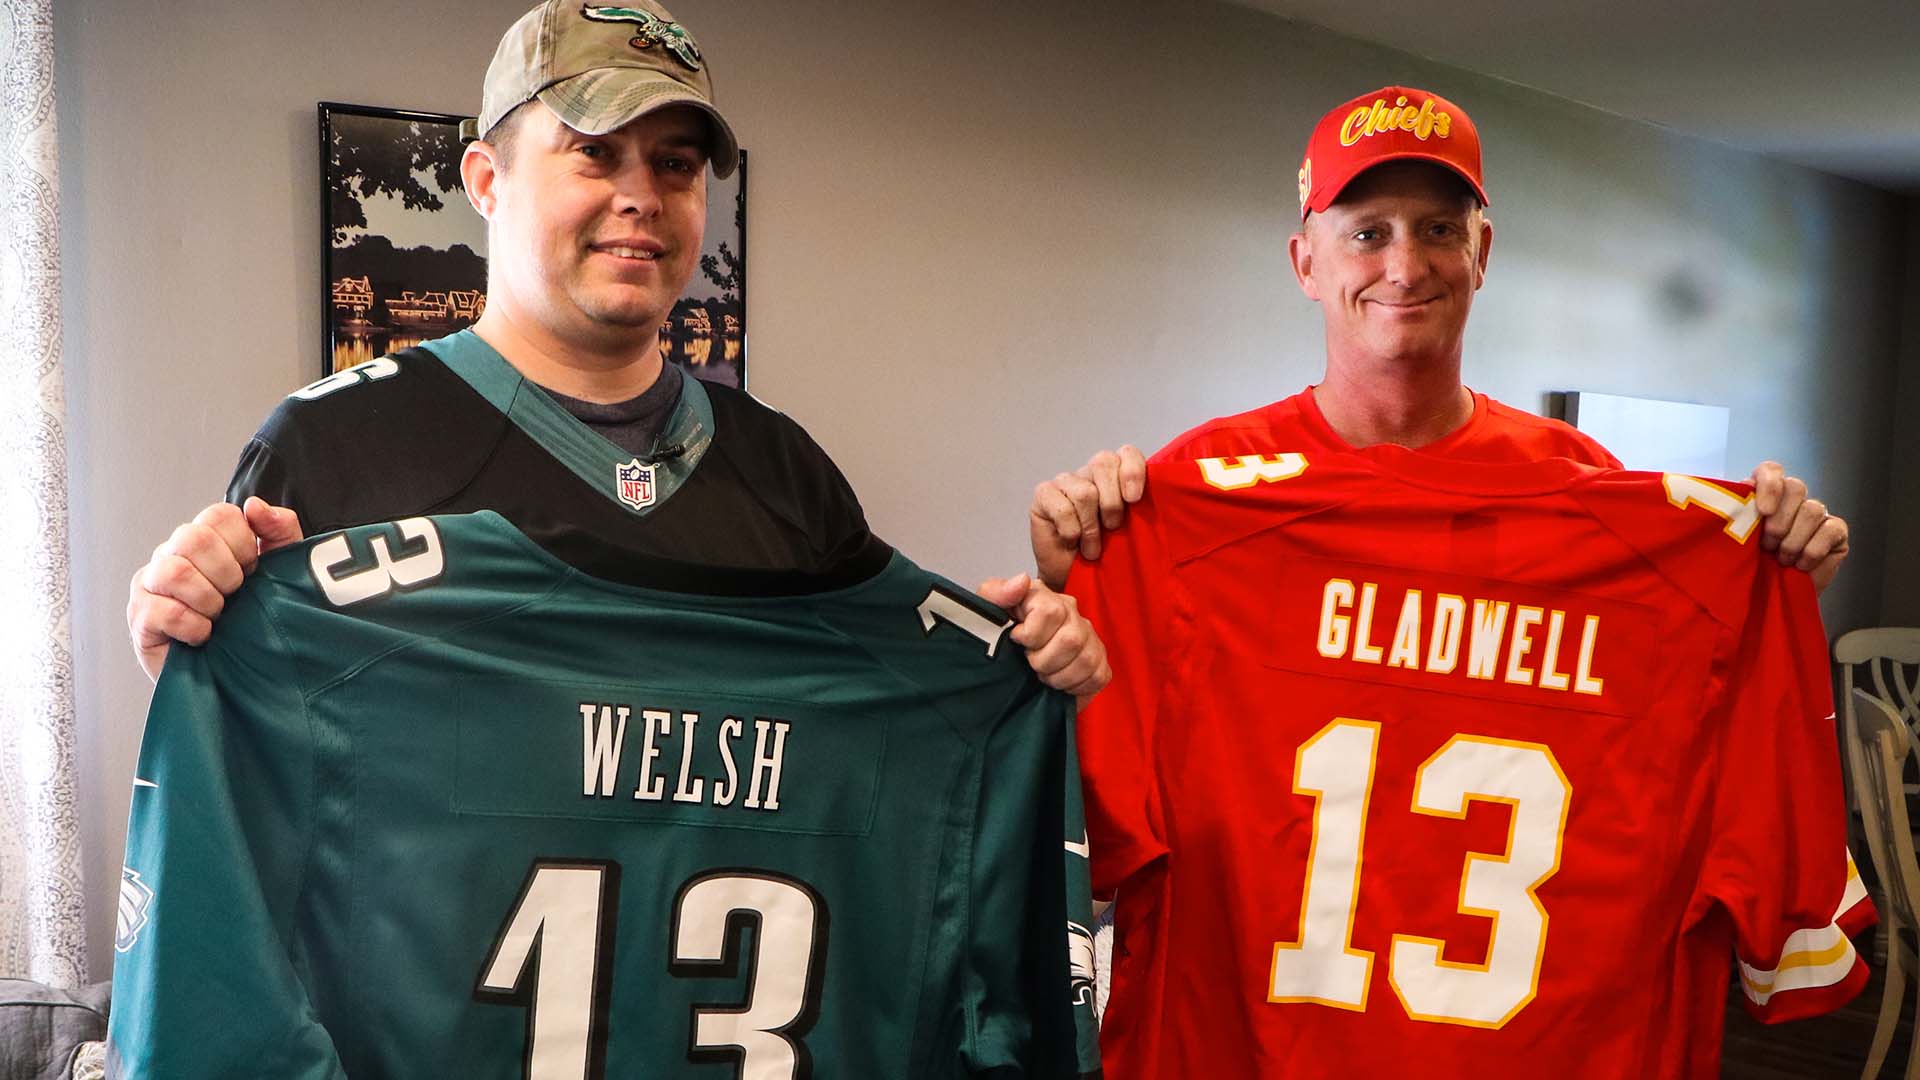 Chiefs to wear white and Eagles to wear green at SB LVII, can KC fans start  celebrating already?